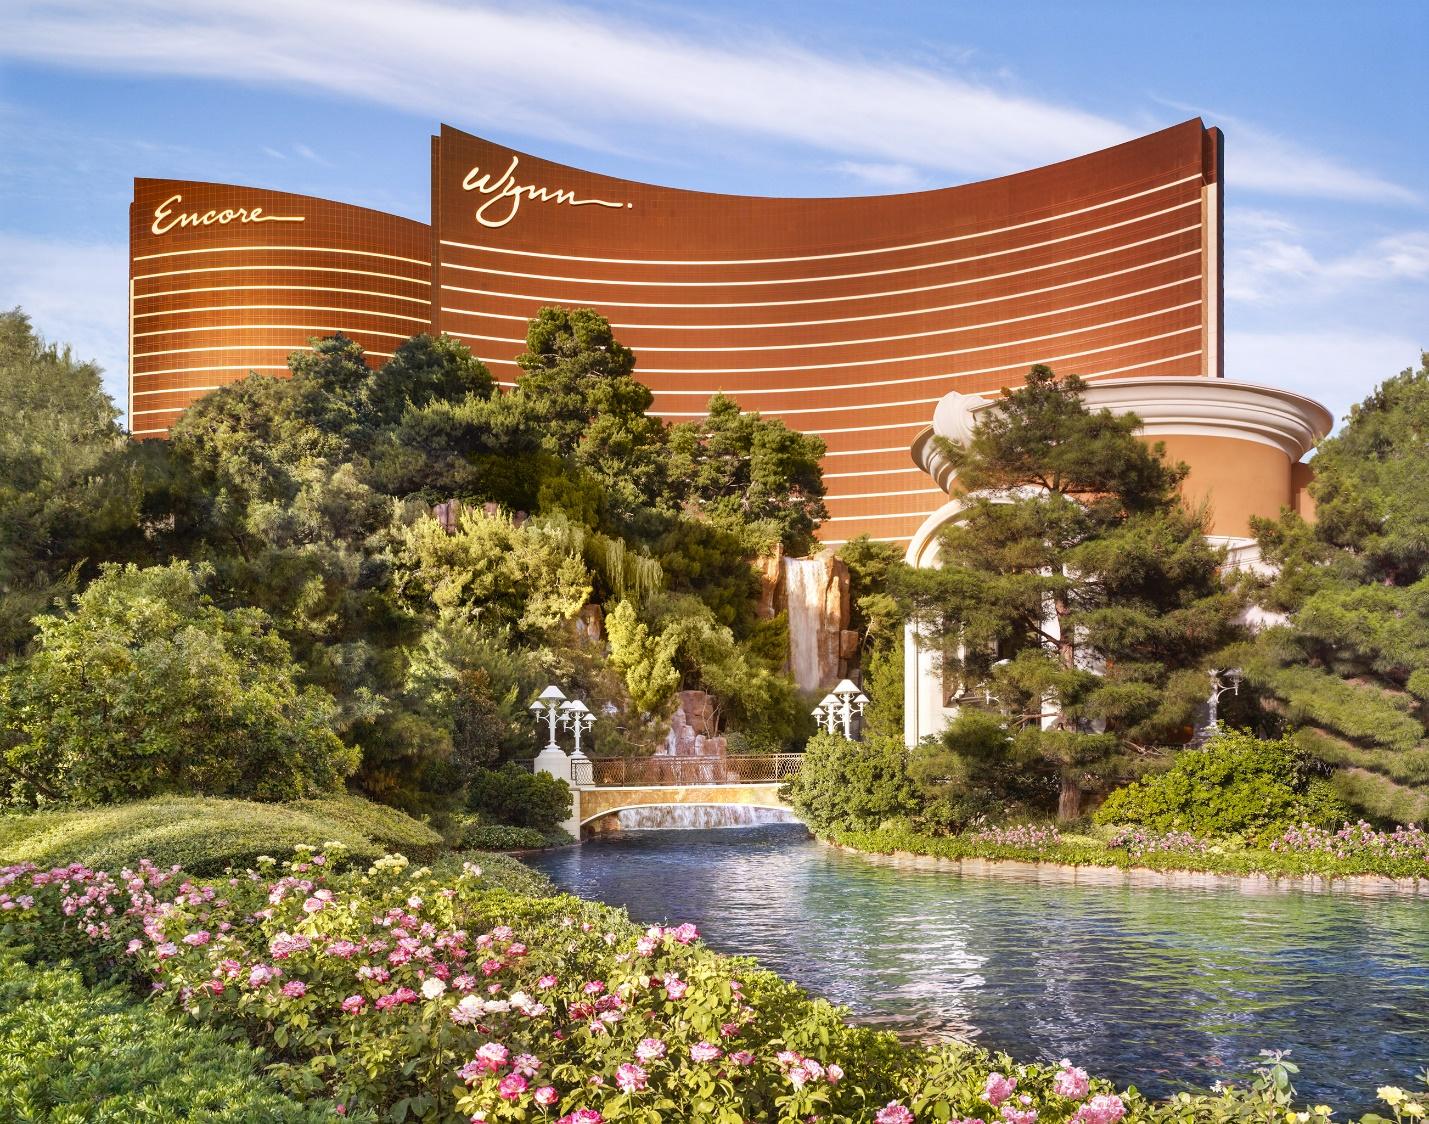 Encore by Wynn hotel Las Vegas review in 360° - is it any different from  other luxury casino hotels? - Turning left for less